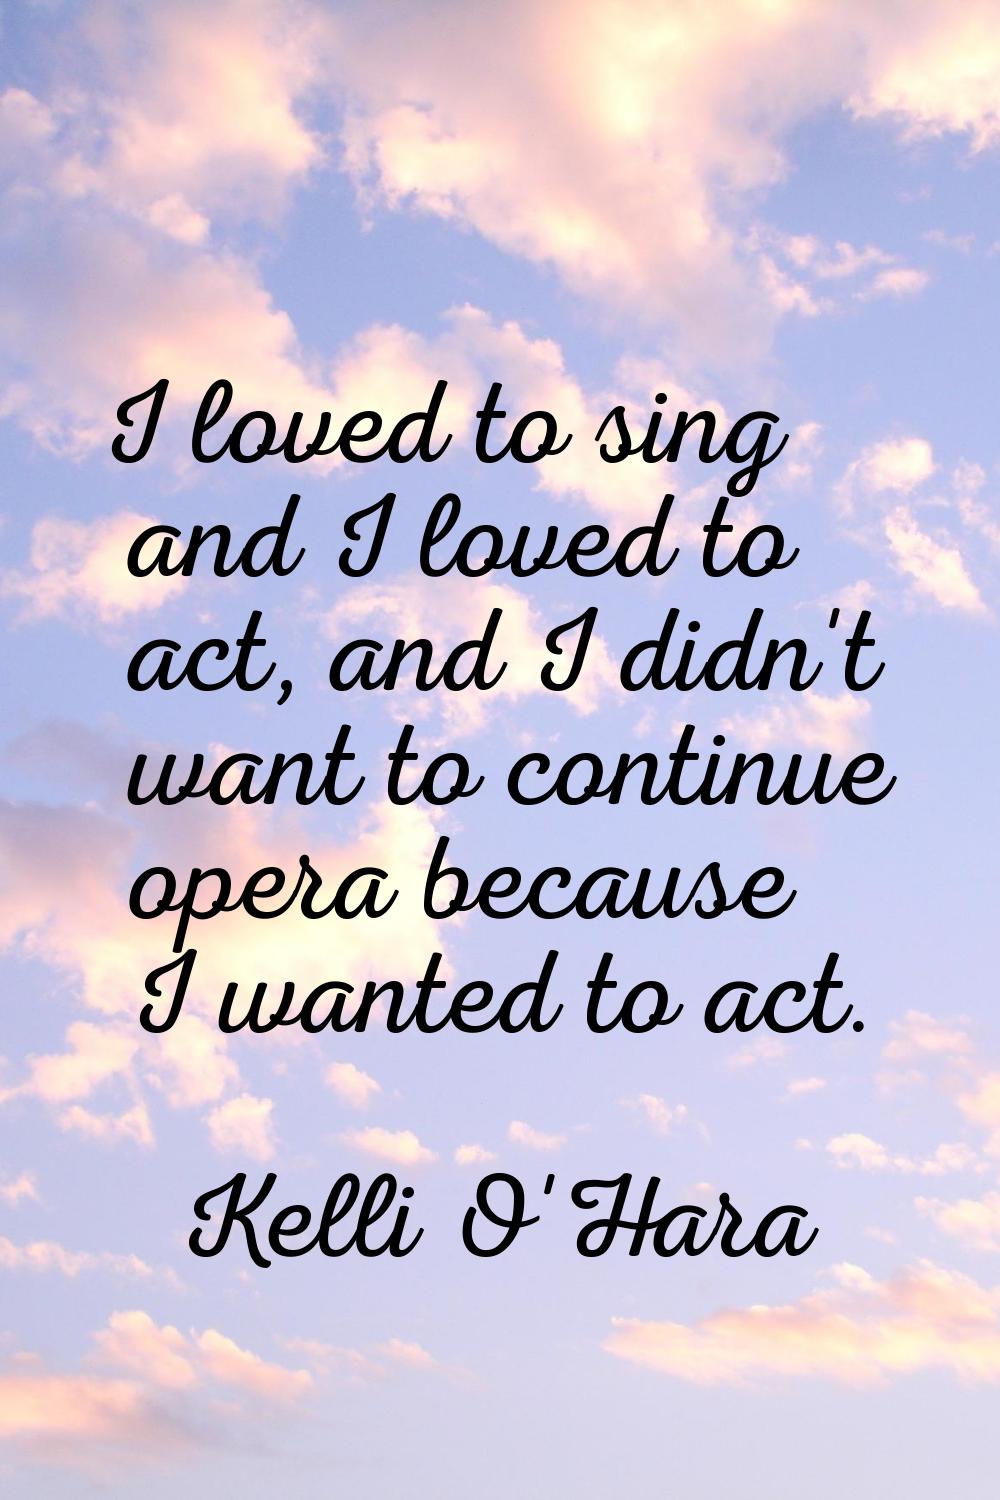 I loved to sing and I loved to act, and I didn't want to continue opera because I wanted to act.